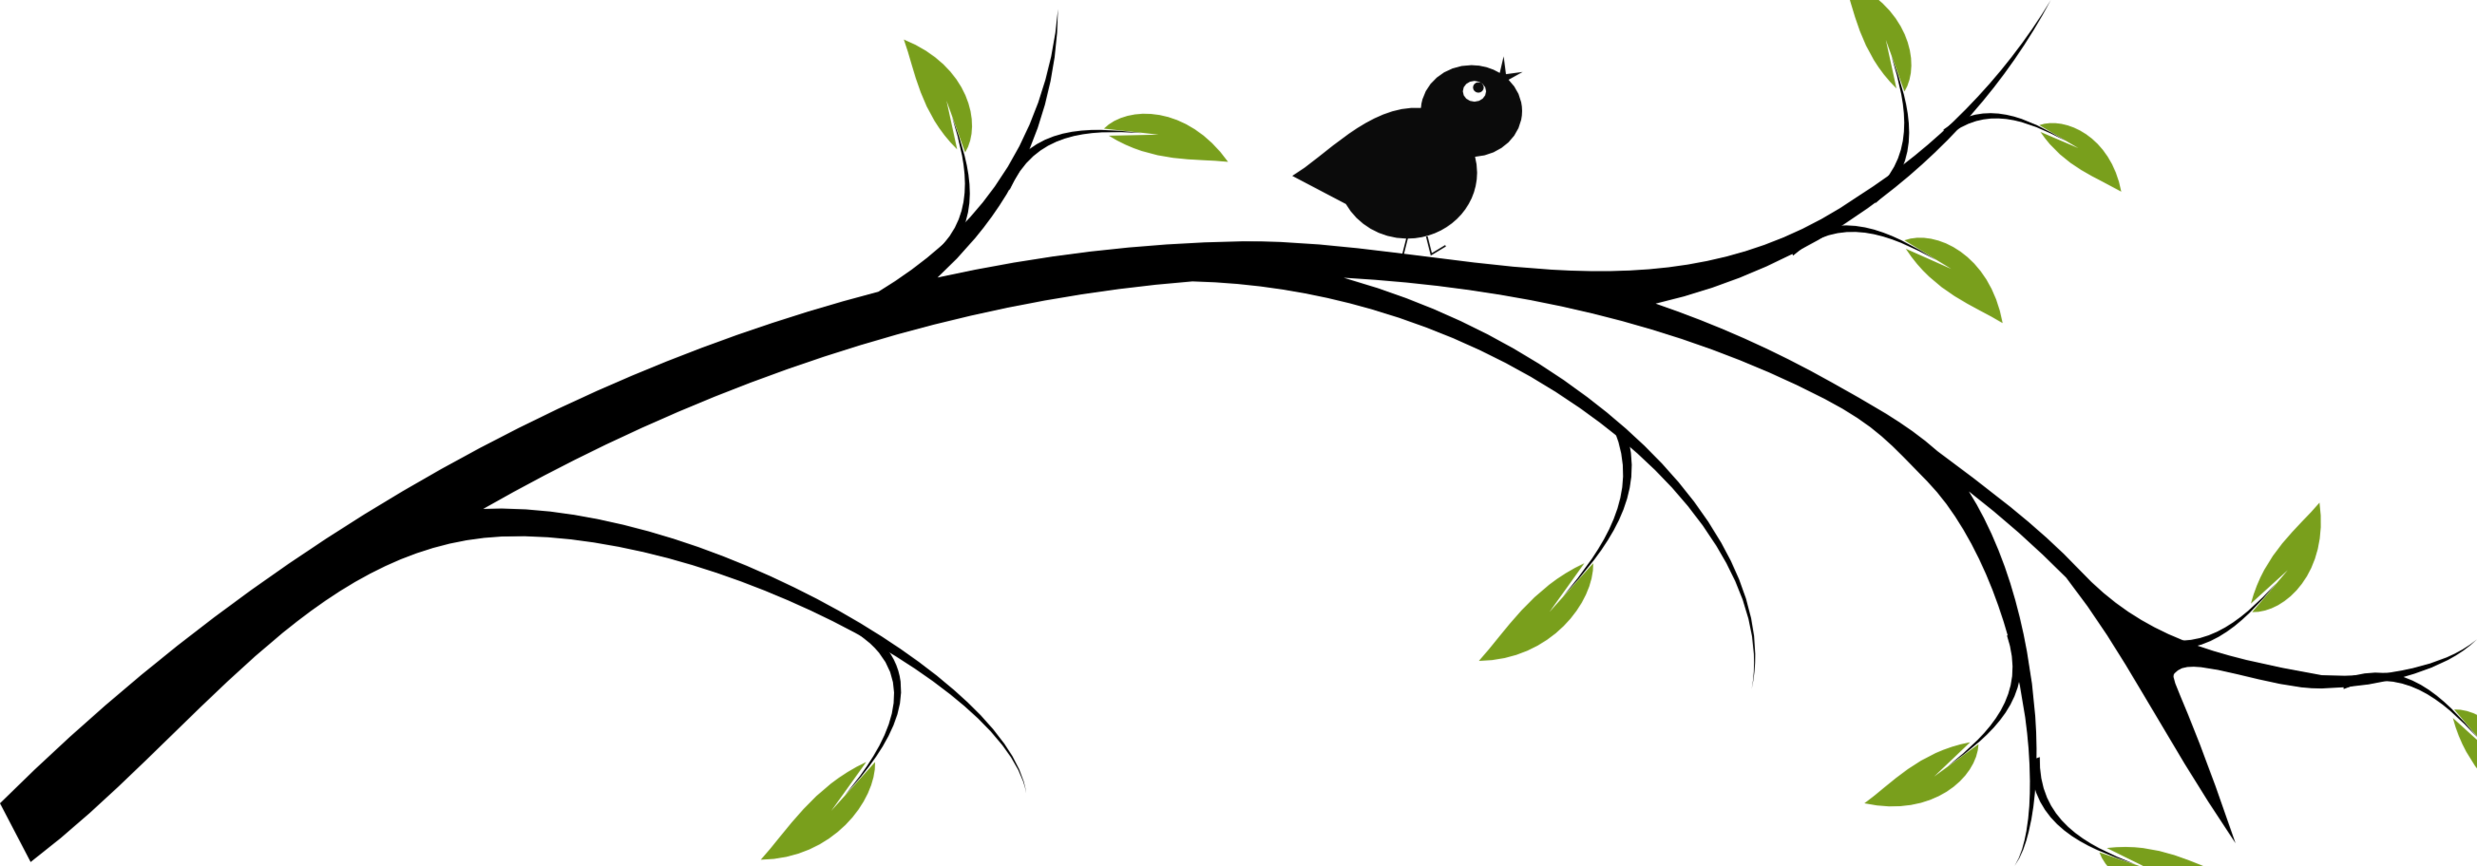 Tree And Bird Silhouette Clipart - Free to use Clip Art Resource